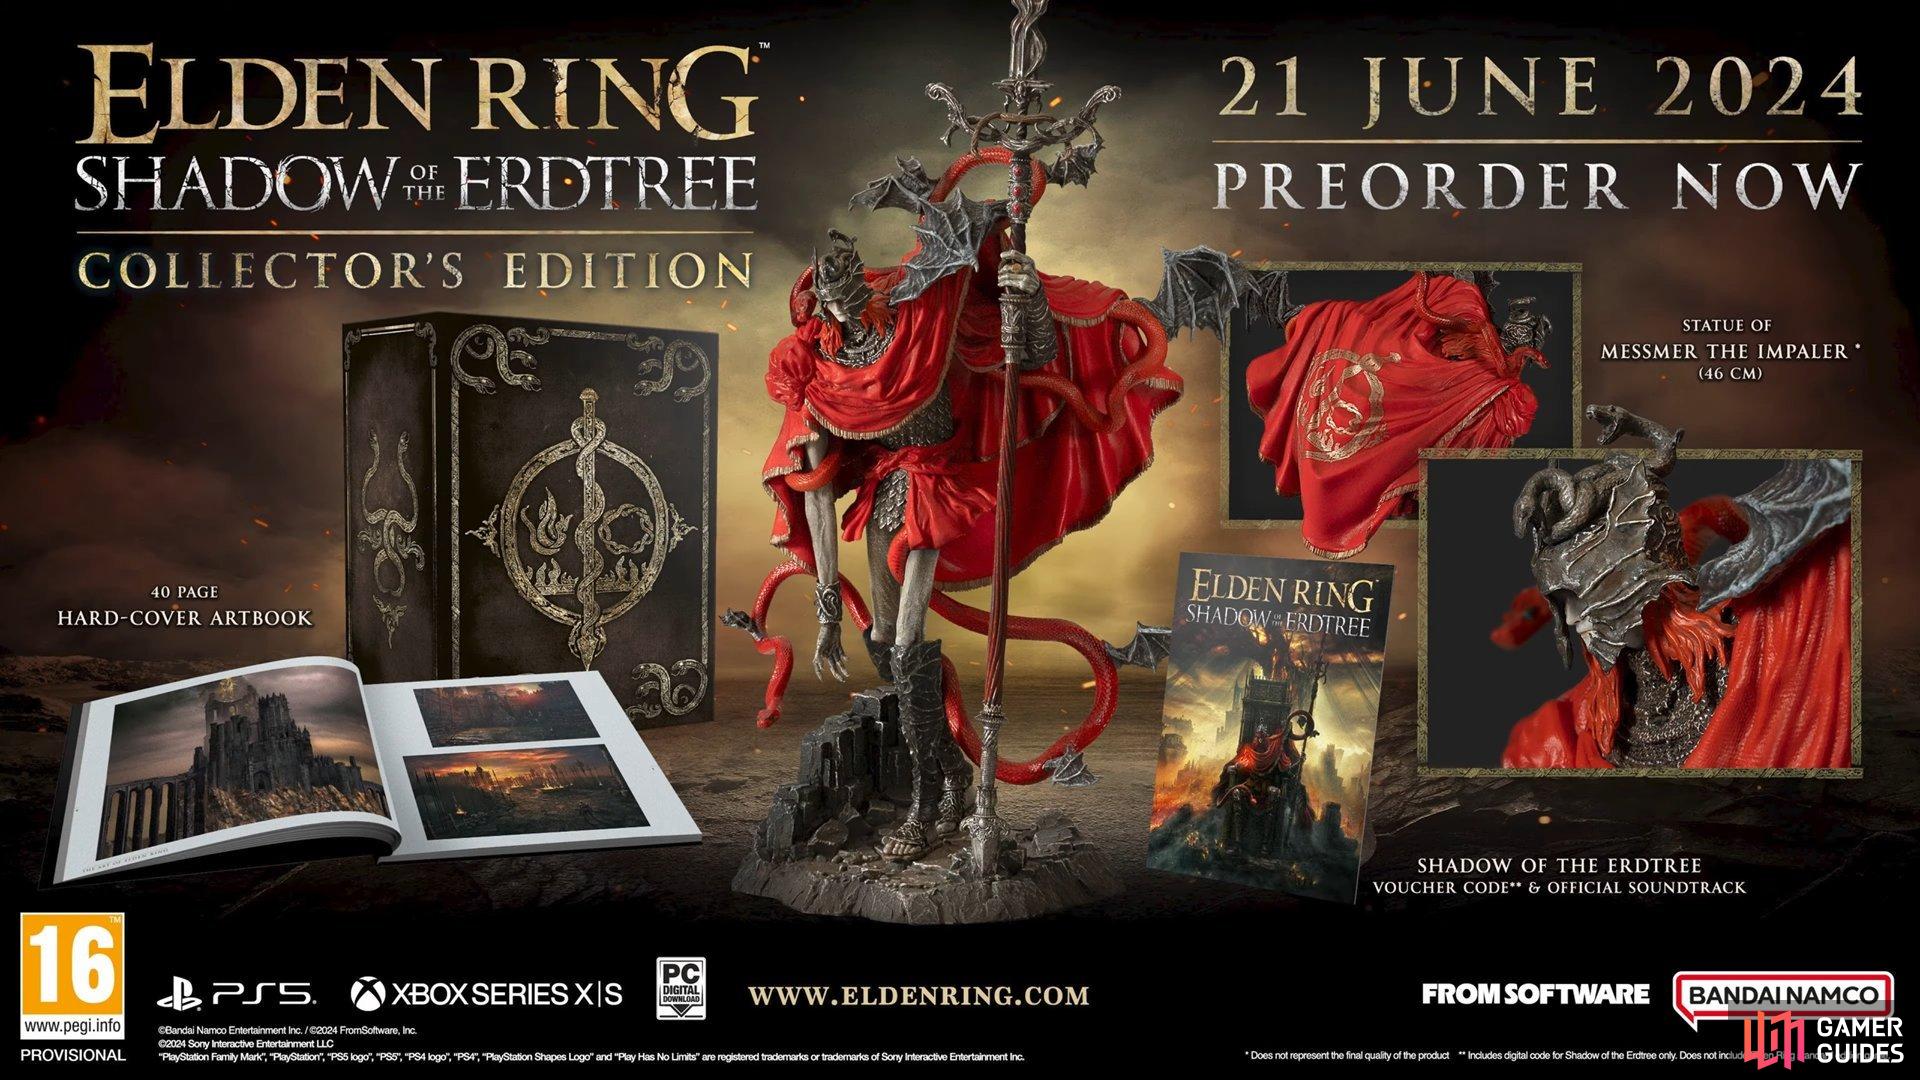 The Elden Ring Shadow of the Erdtree Collector’s Edition is a pricey, but amazing looking version of the game!